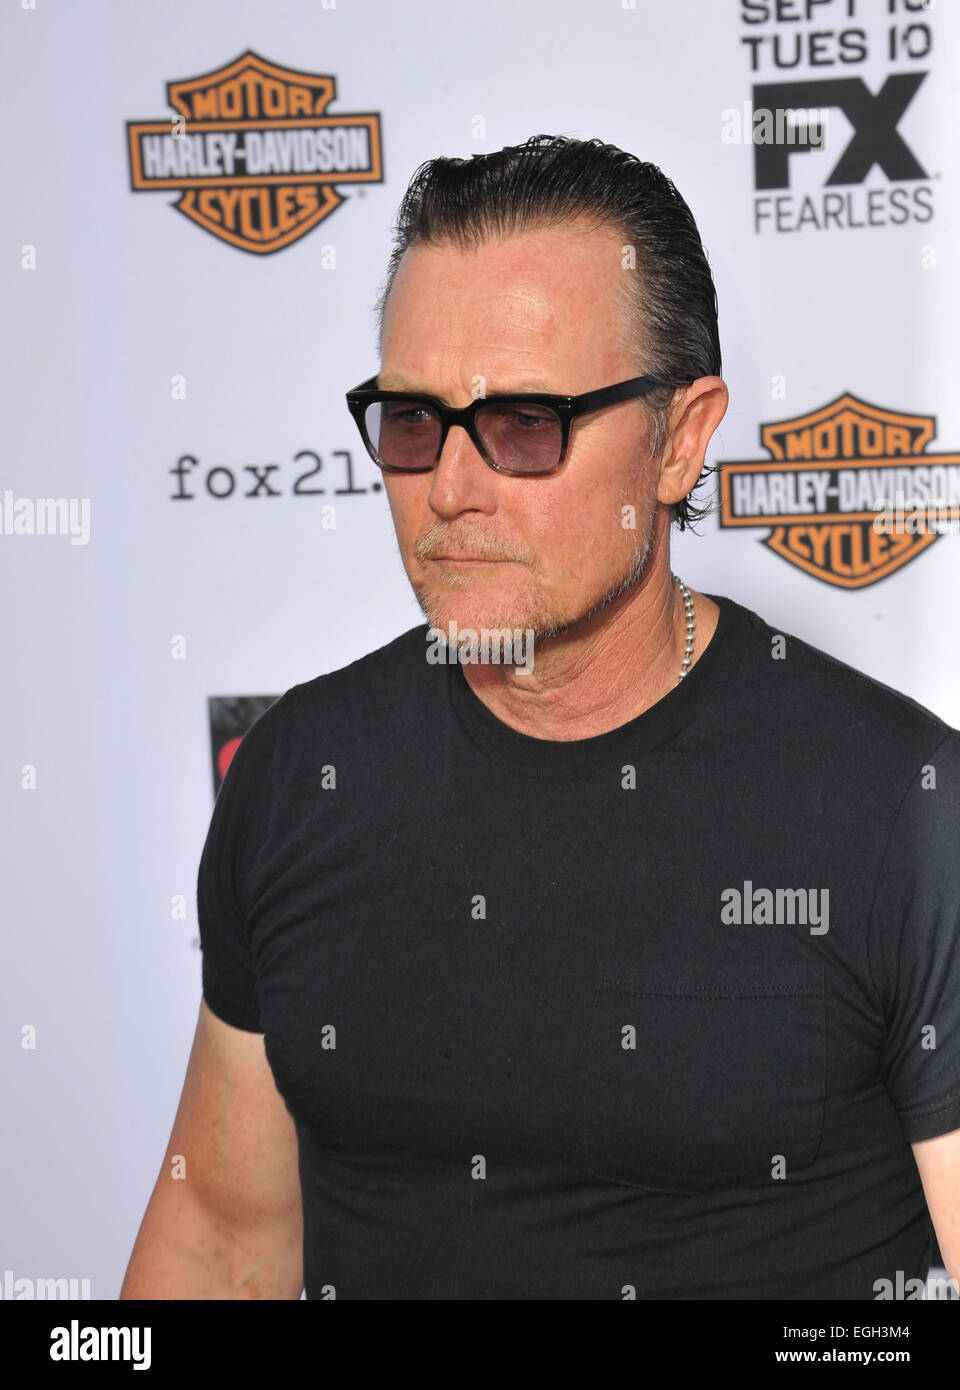 LOS ANGELES, CA - SEPTEMBER 7, 2013: Robert Patrick at the season 6 premiere of 'Sons of Anarchy' at the Dolby Theatre, Hollywood. Stock Photo